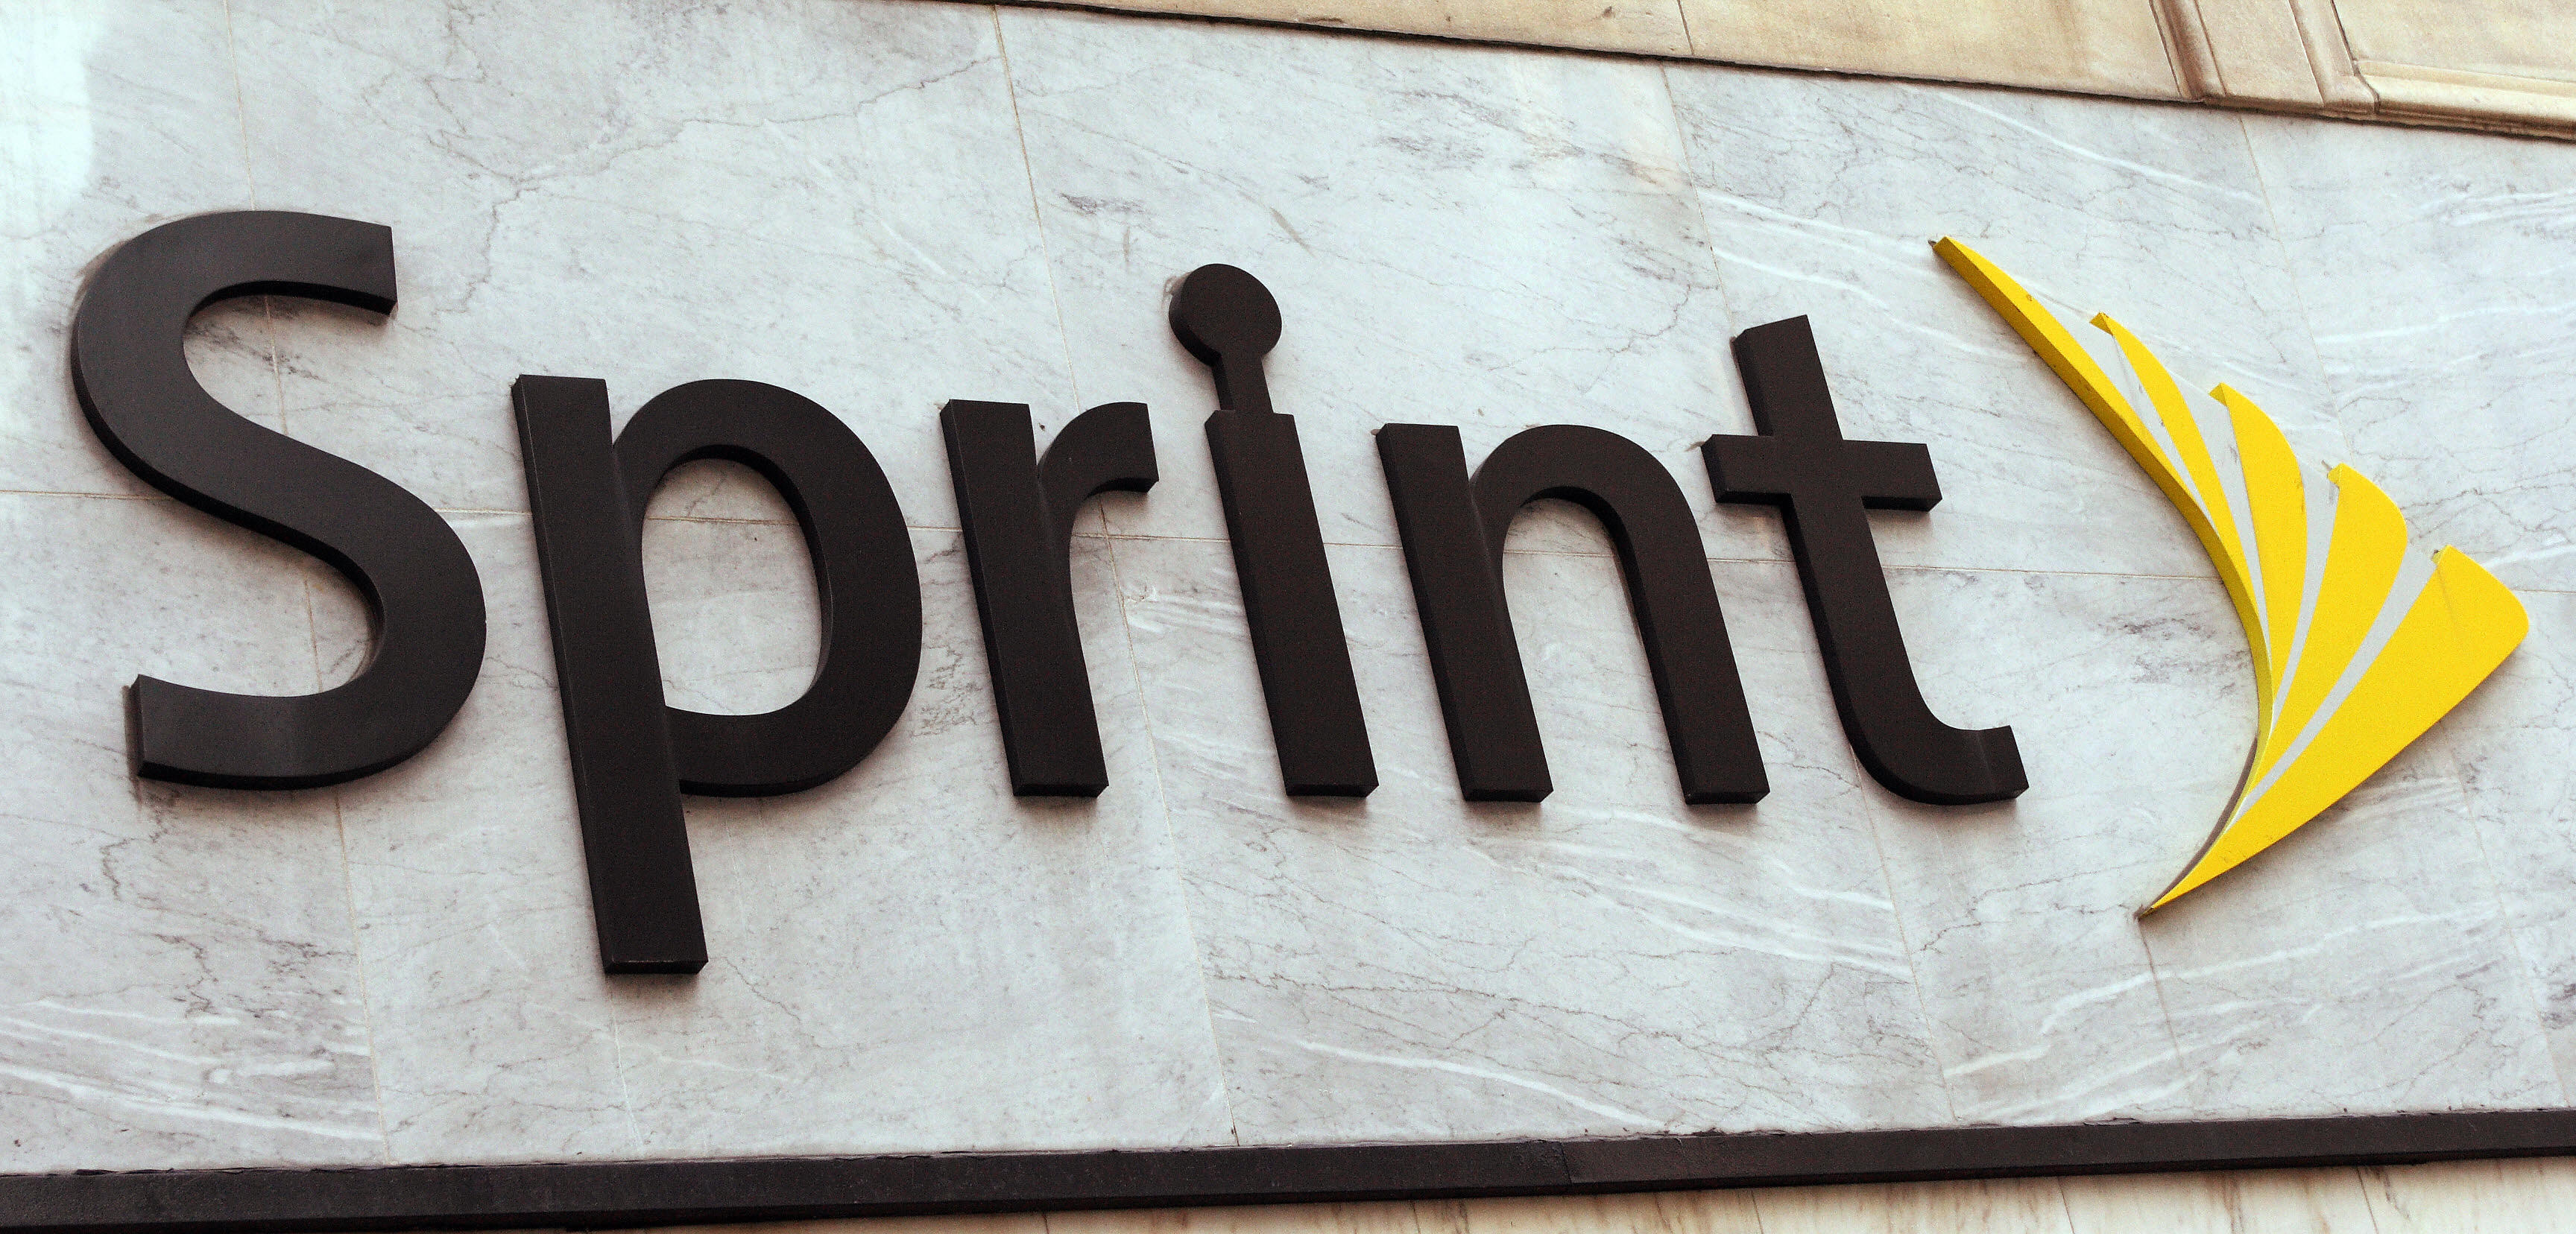 Sprint Says 5G Will Launch In Atlanta, Chicago, Dallas, and Kansas City This May